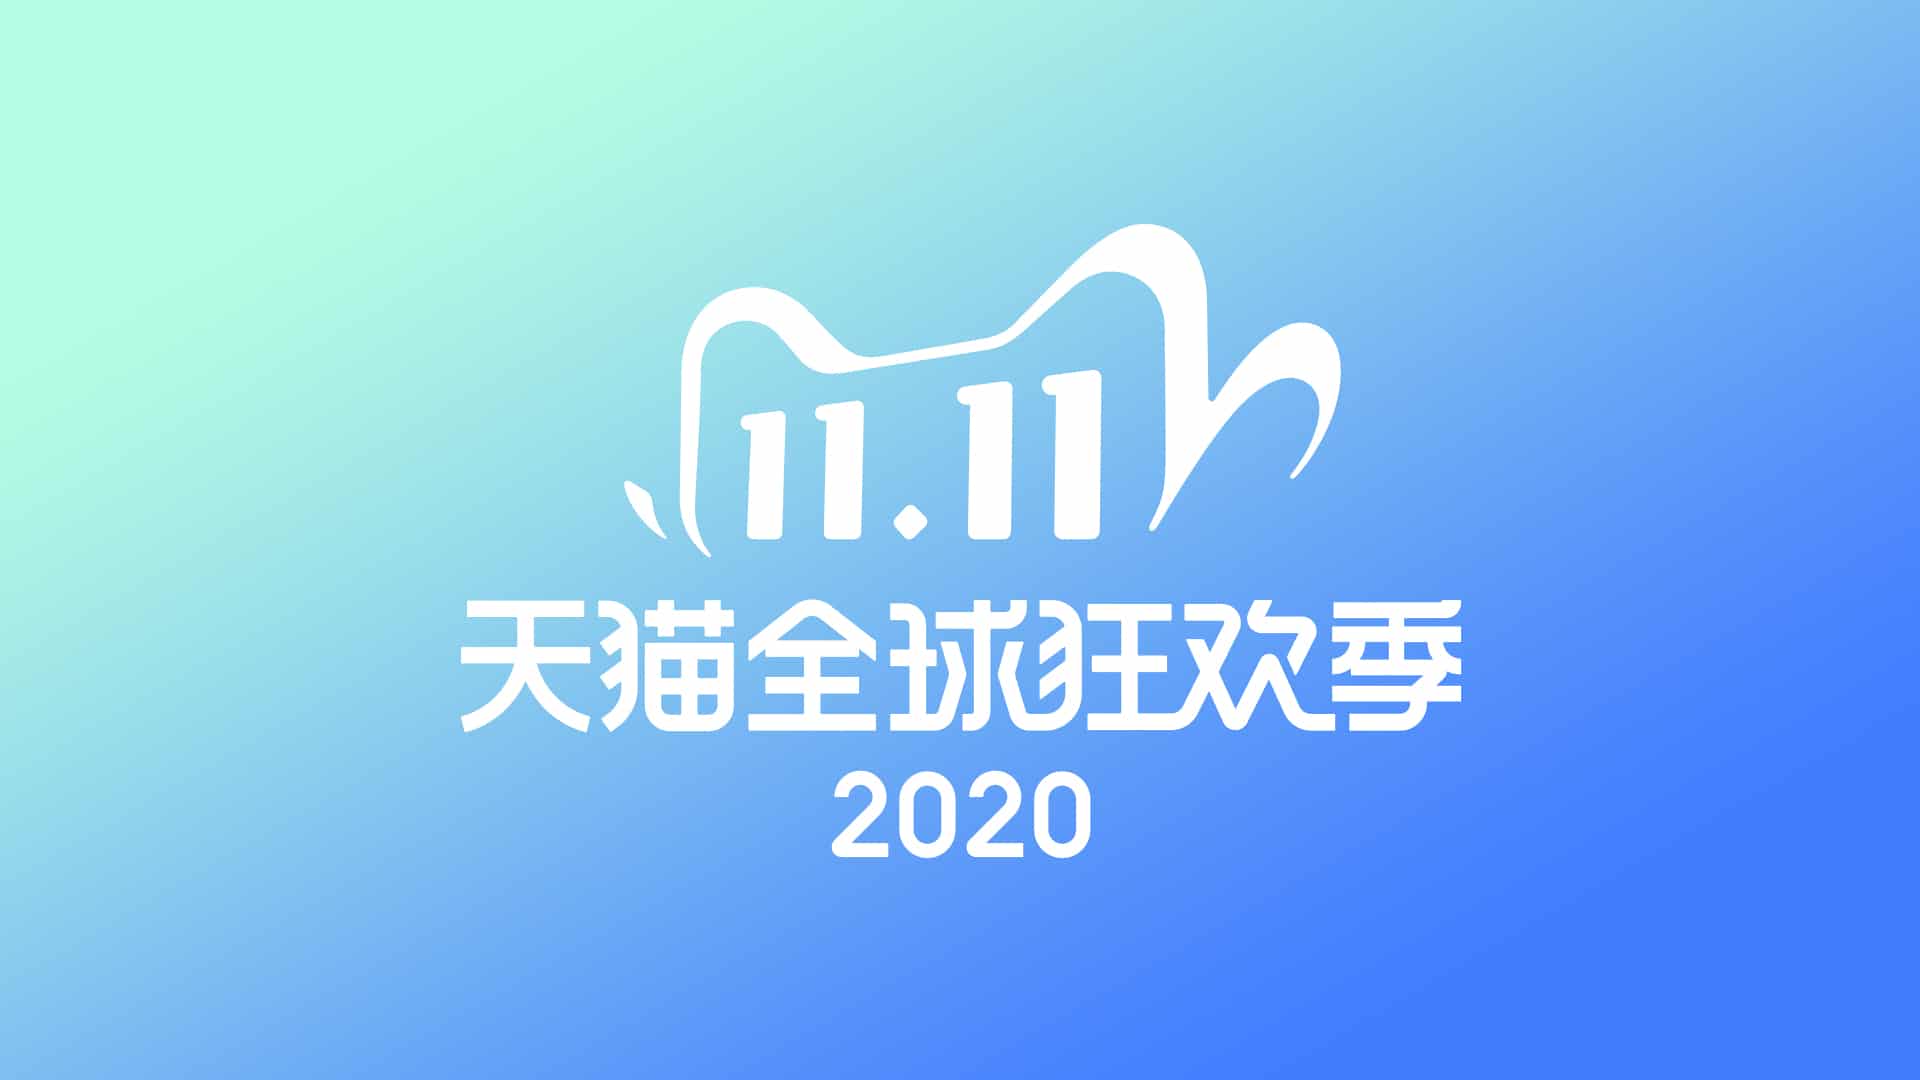 2020 Double 11 Shopping Festival once again breaks the record